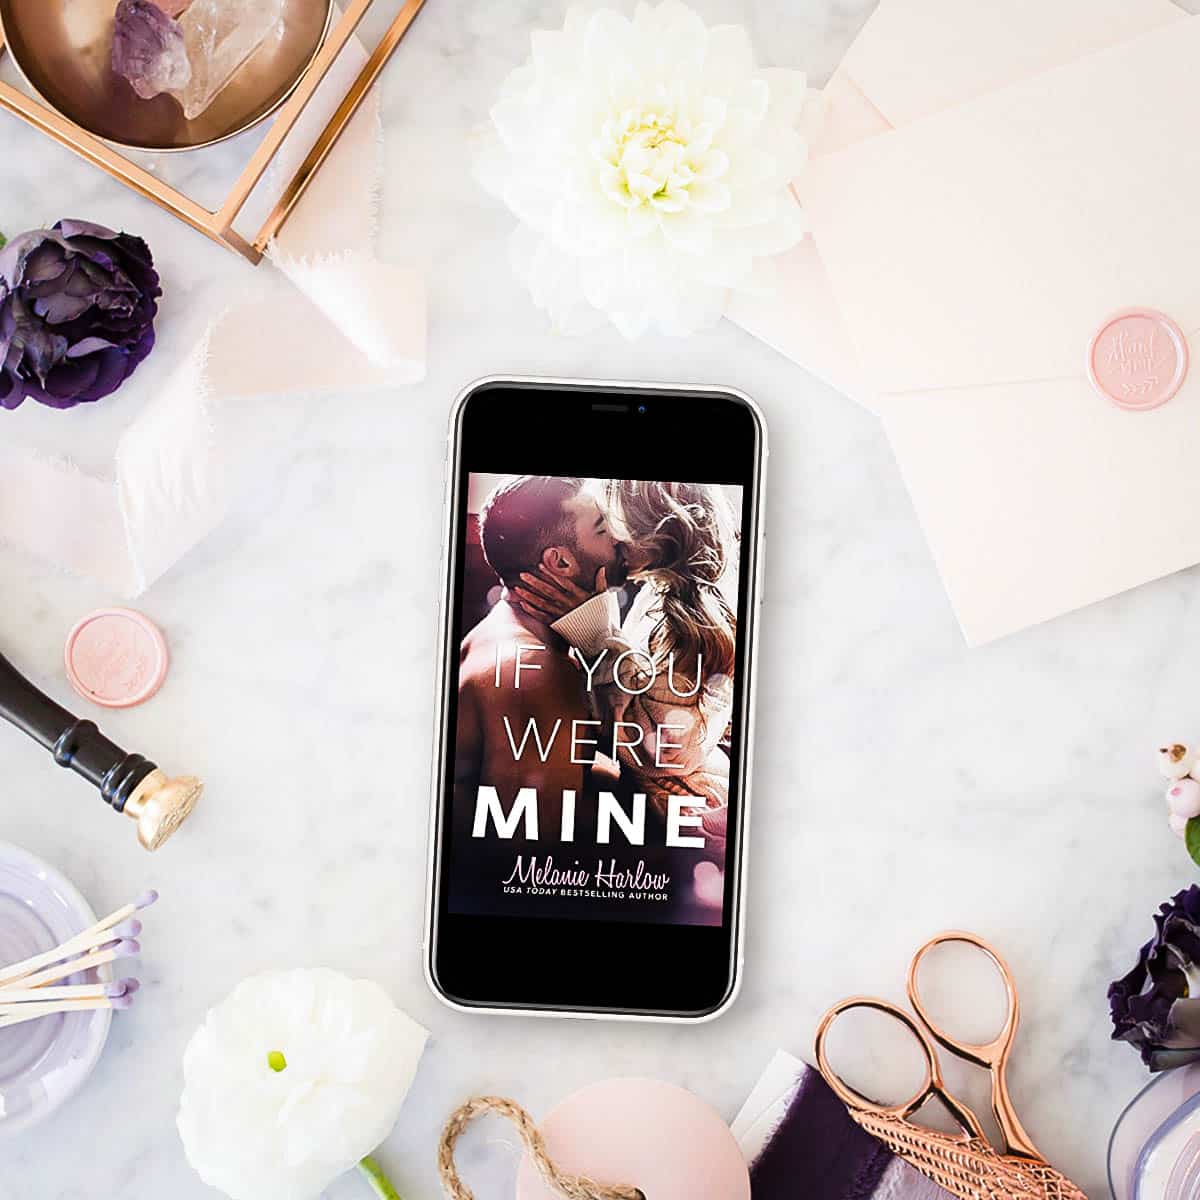 If You Were Mine by Melanie Harlow-featured